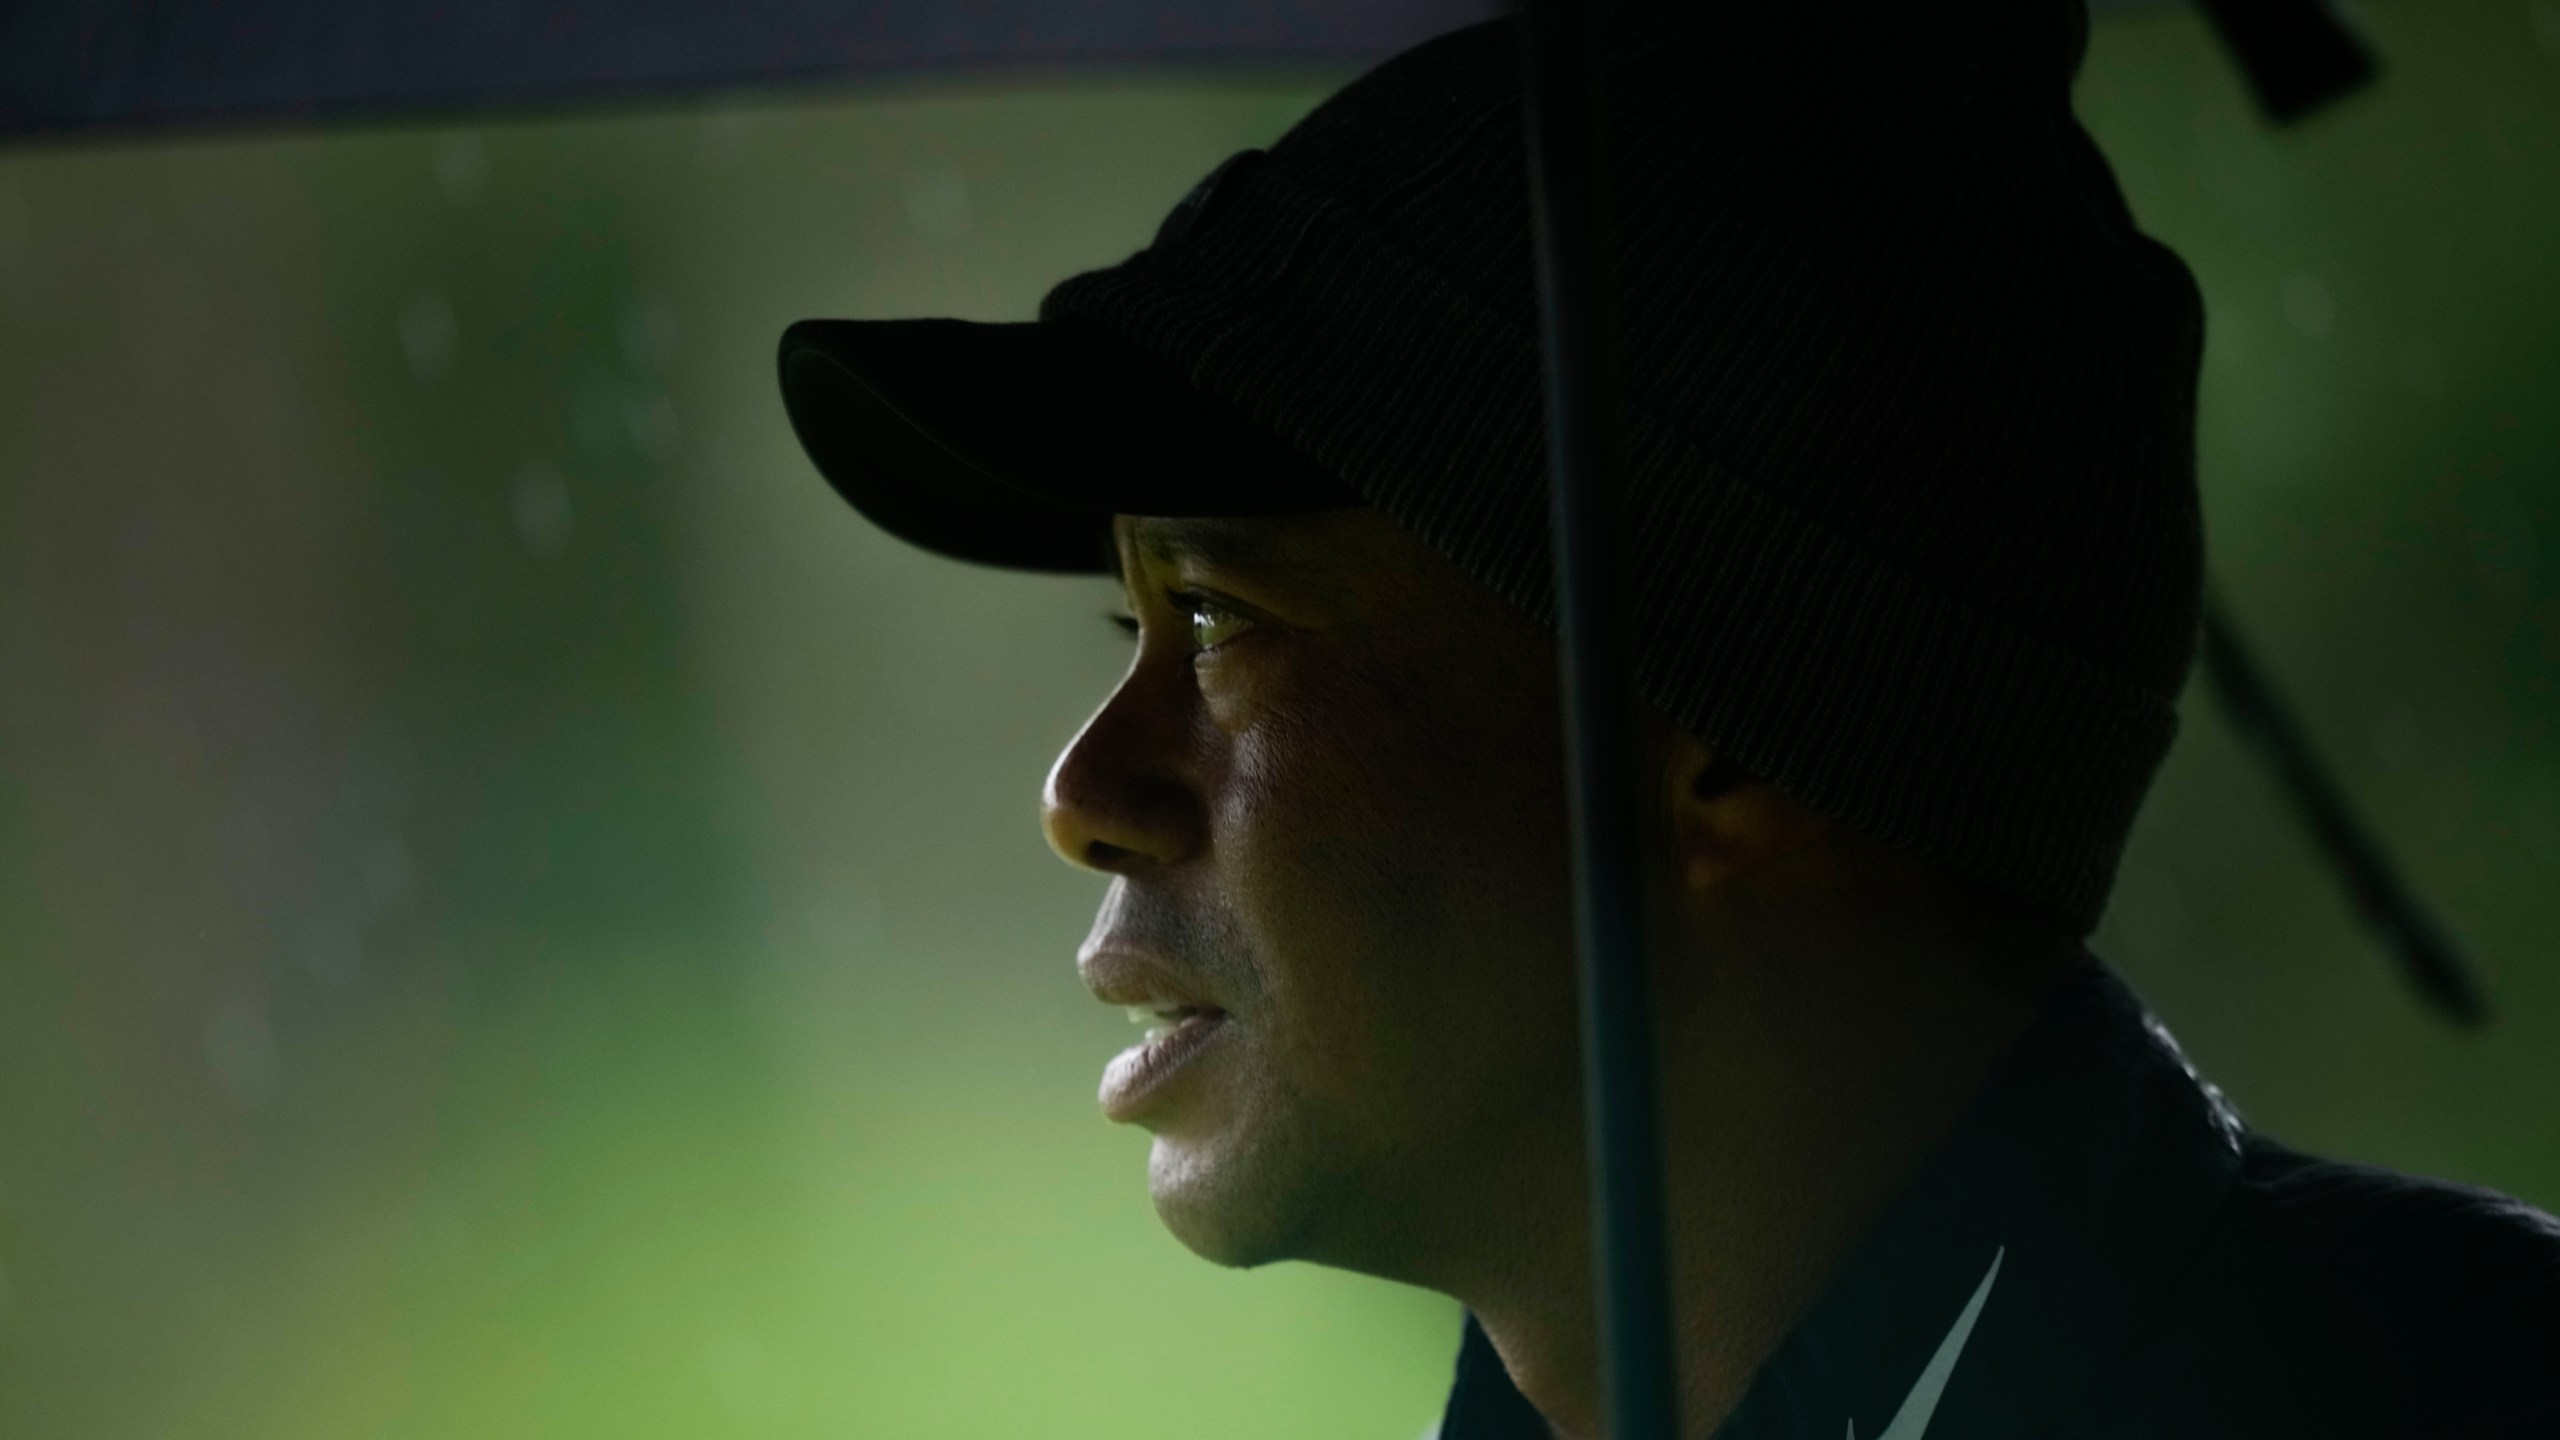 Tiger Woods watches on the 13th hole during the weather delayed third round of the Masters golf tournament at Augusta National Golf Club on Saturday, April 8, 2023, in Augusta, Ga. (AP Photo/Matt Slocum)